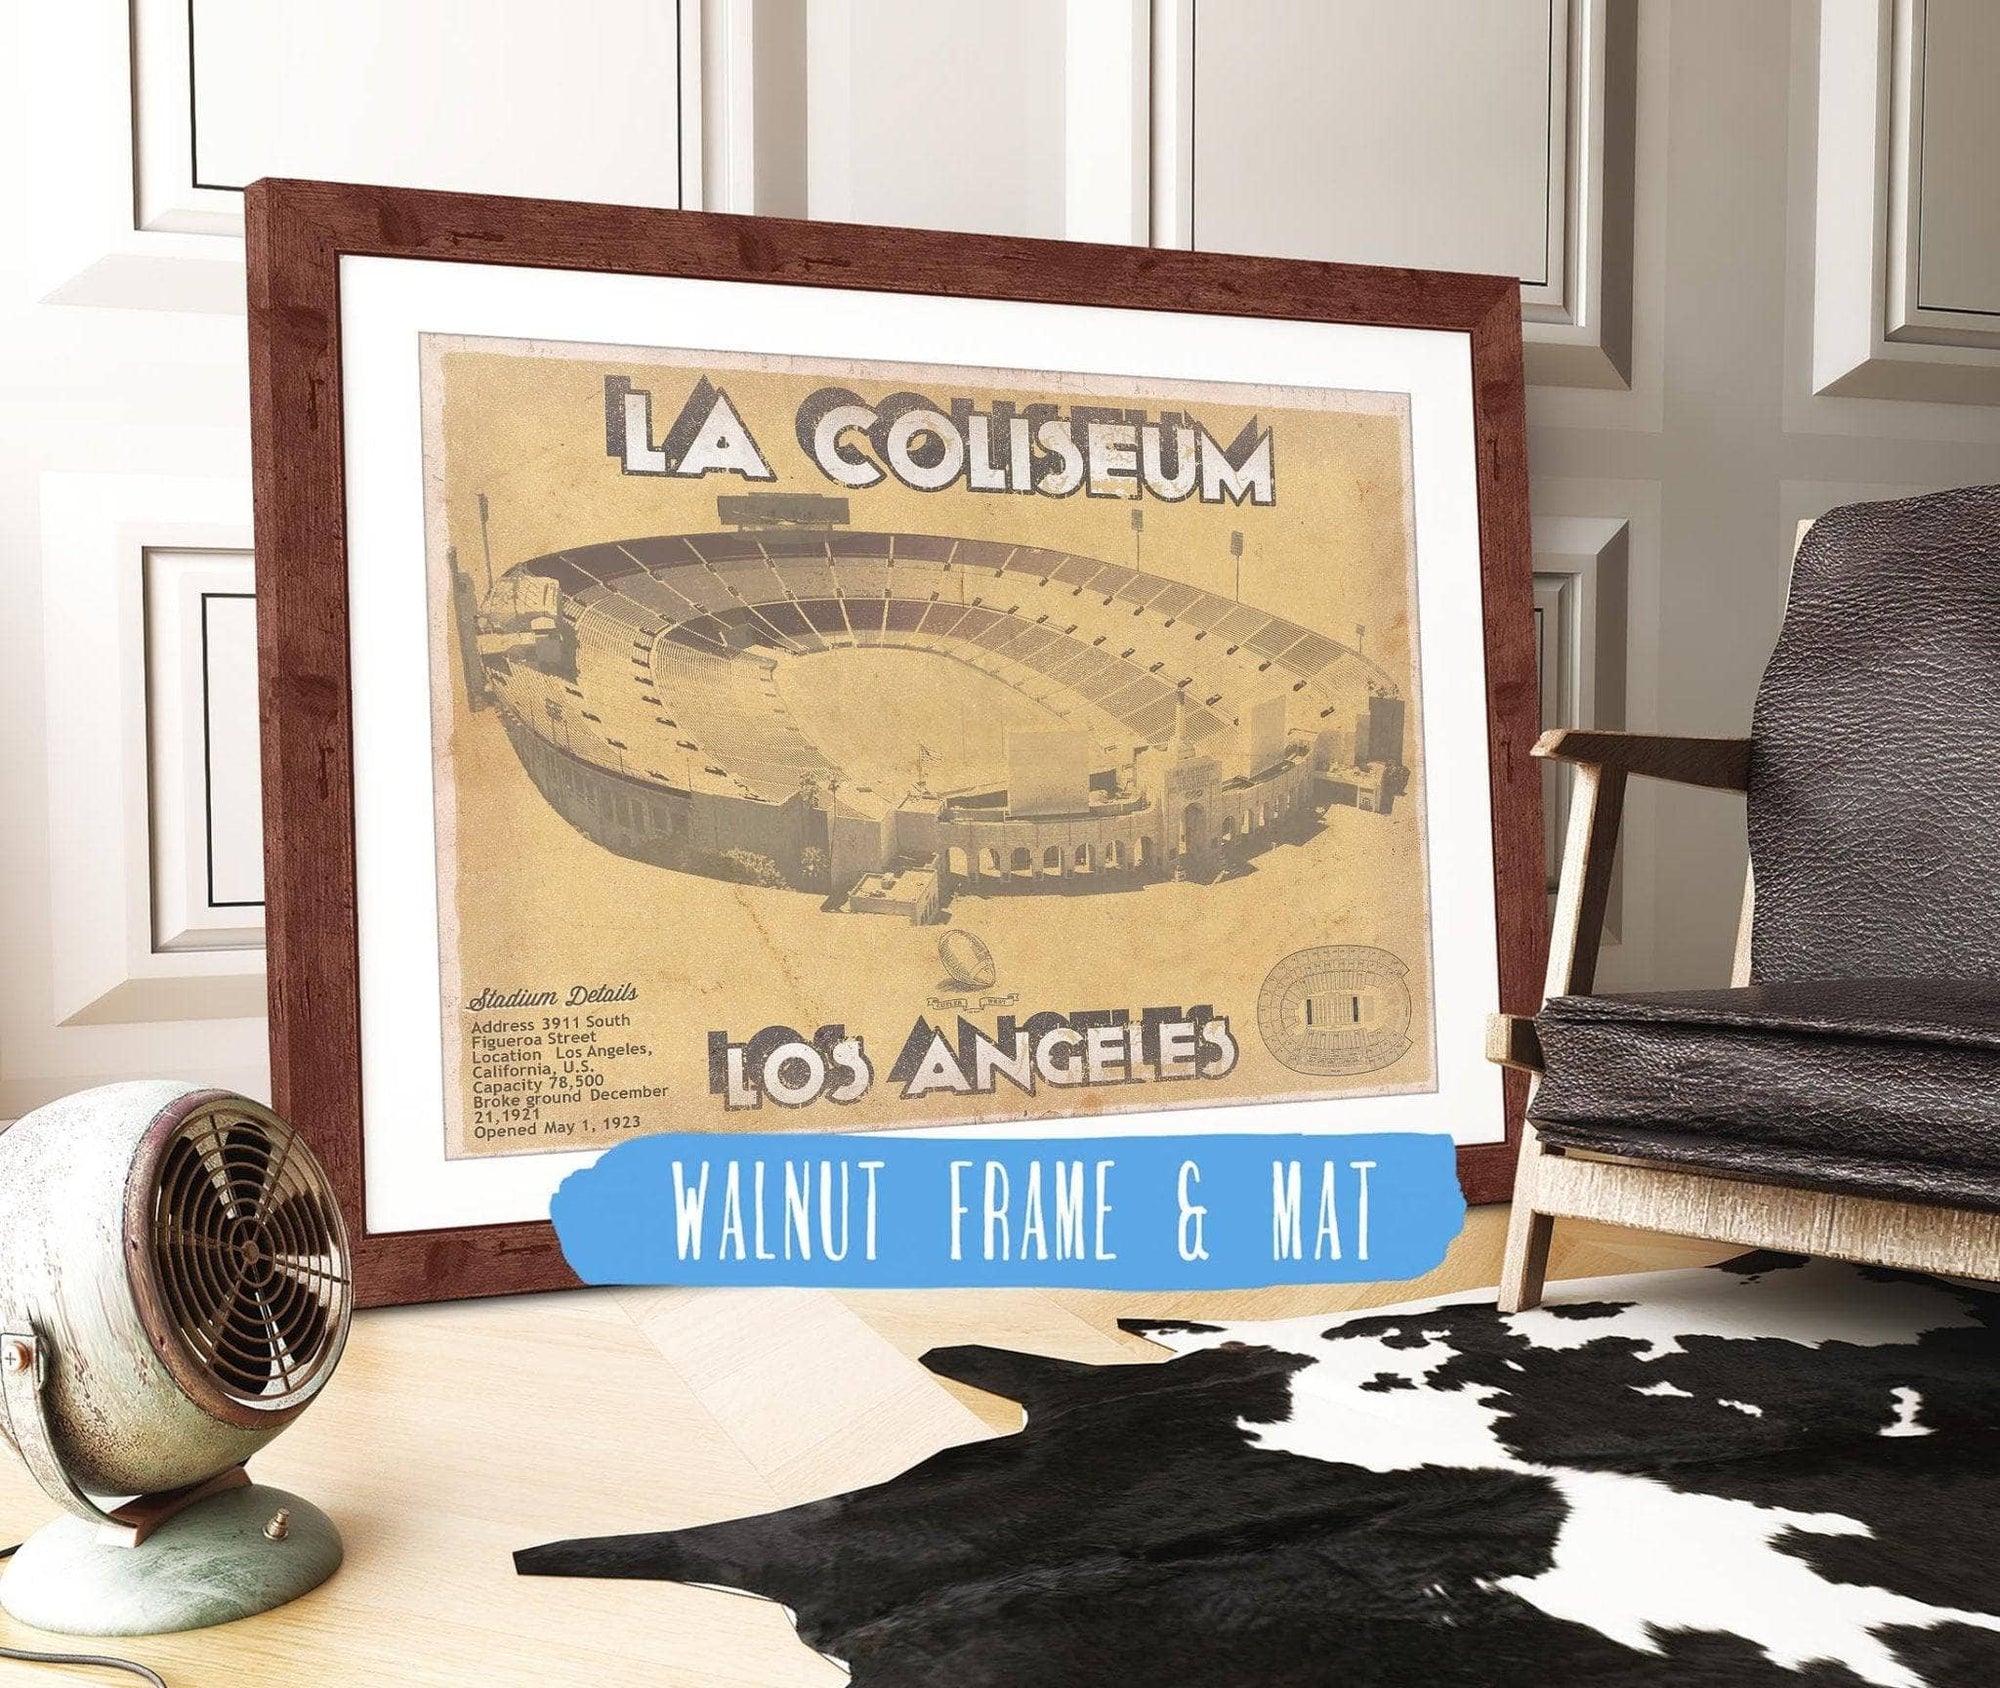 Cutler West Pro Football Collection 14" x 11" / Walnut Frame & Mat Los Angeles Rams LA Coliseum Seating Chart - Vintage Football Print 728039387_65240